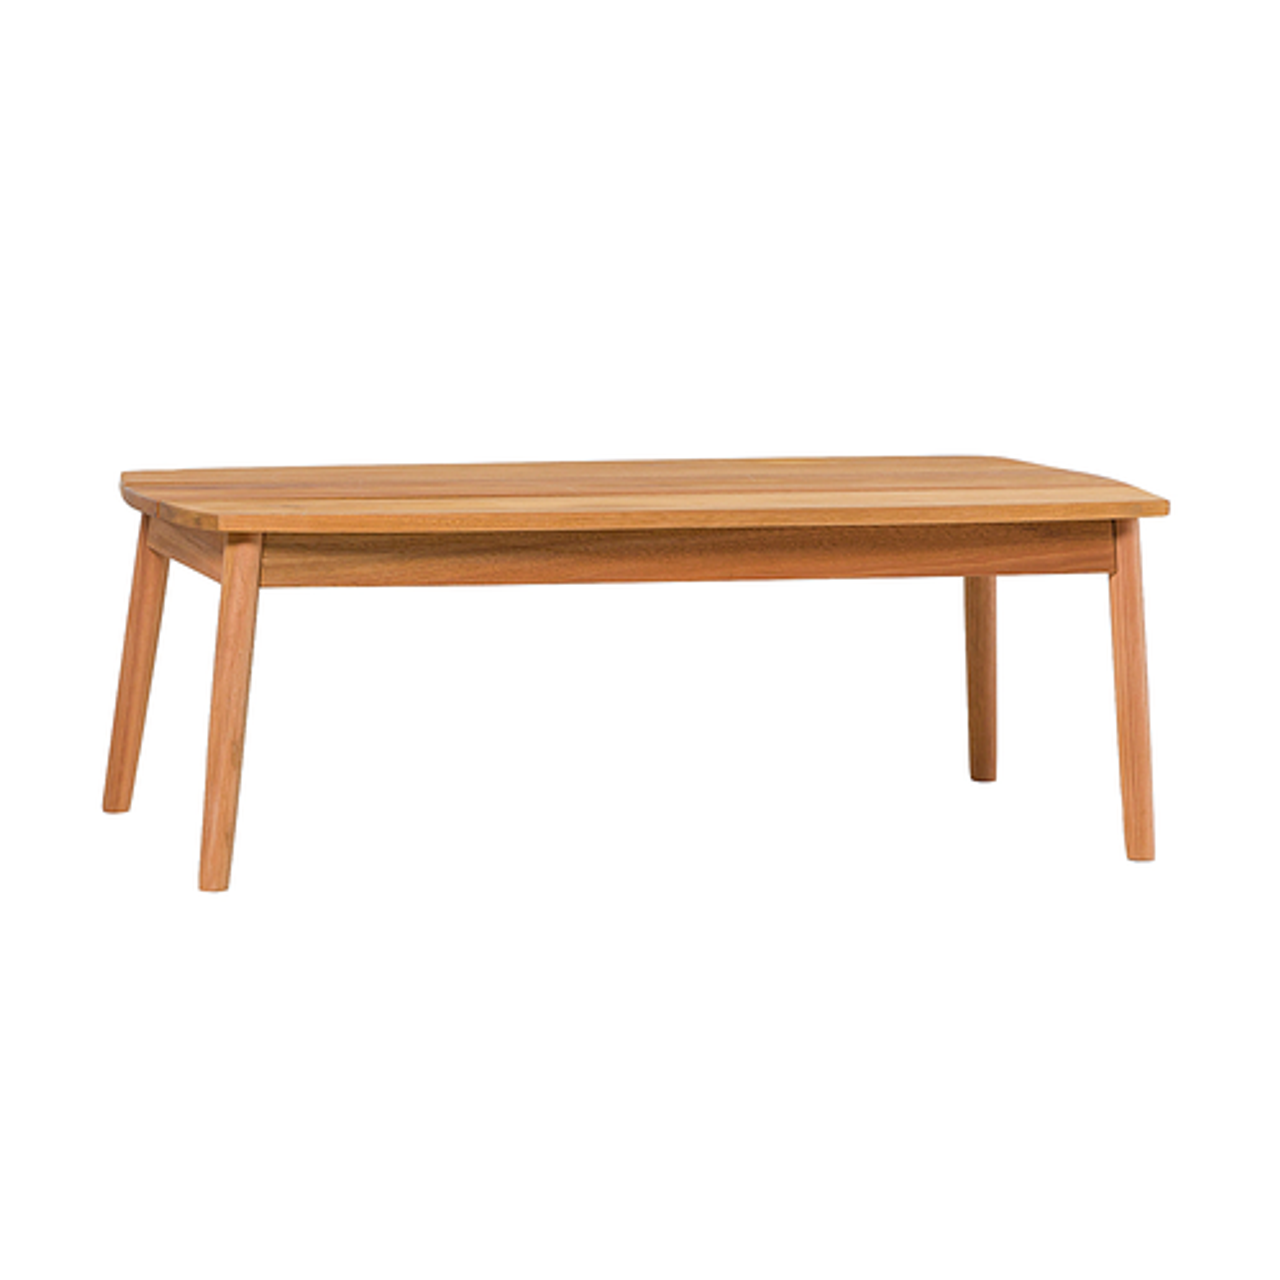 Walker Edison - Modern Solid Wood Spindle-Style Outdoor Coffee Table - Natural